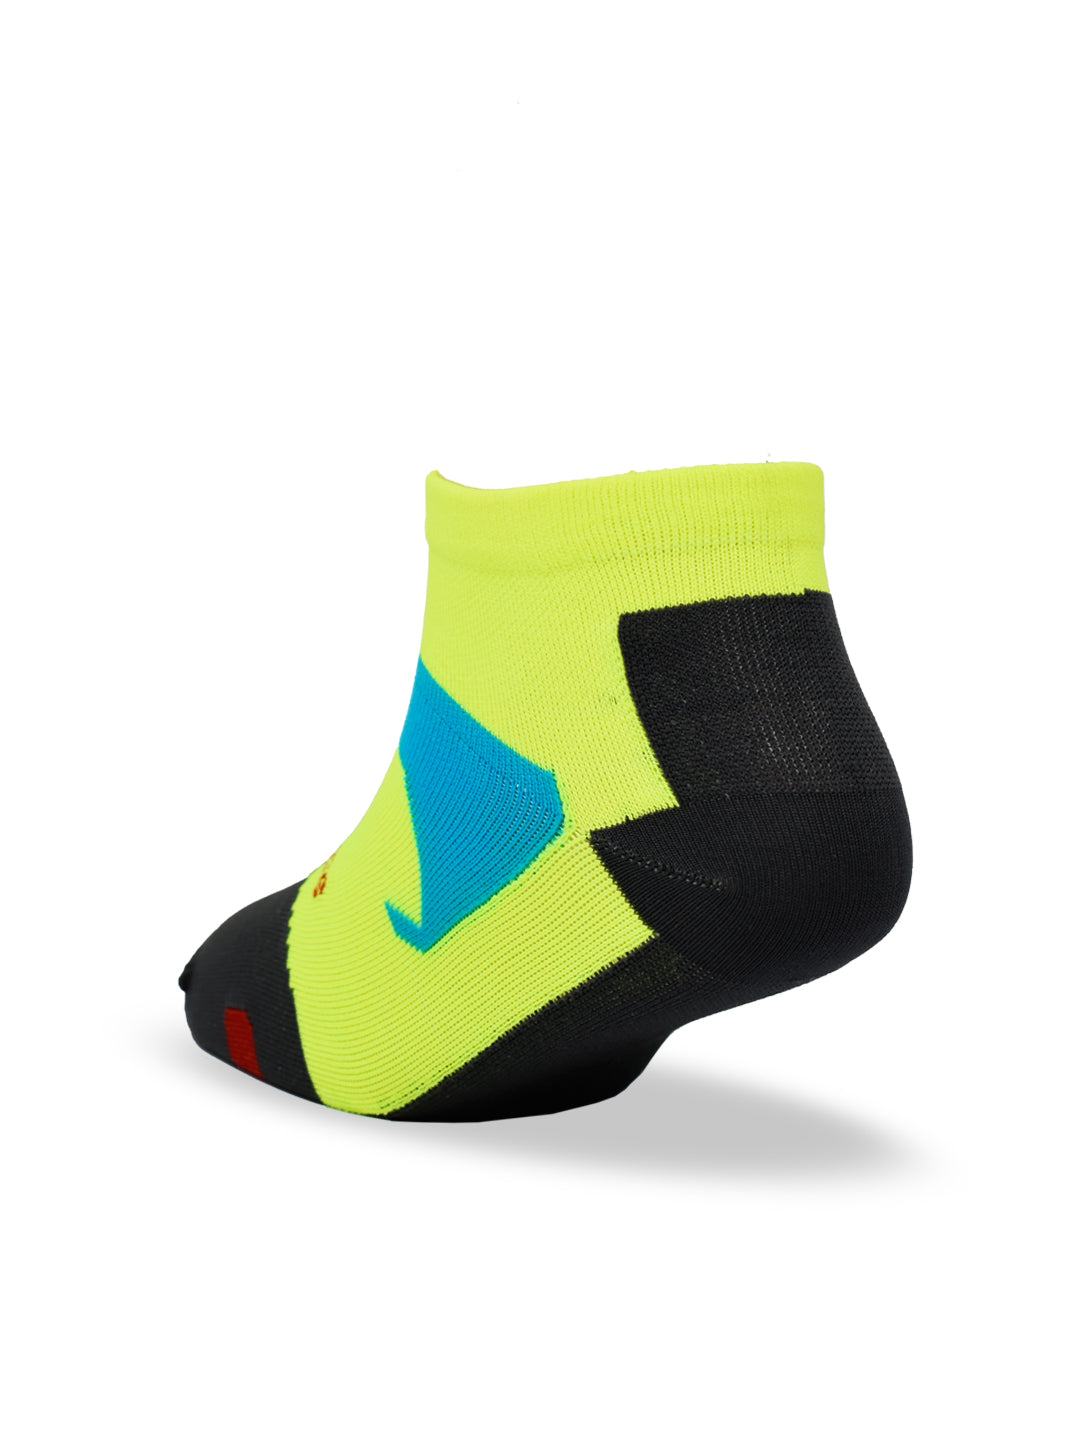 Young Wings Anti-Bacterial Dri-Fit Ankle Length Running Socks - Pack of 3 Pairs, Colour: Green/Black